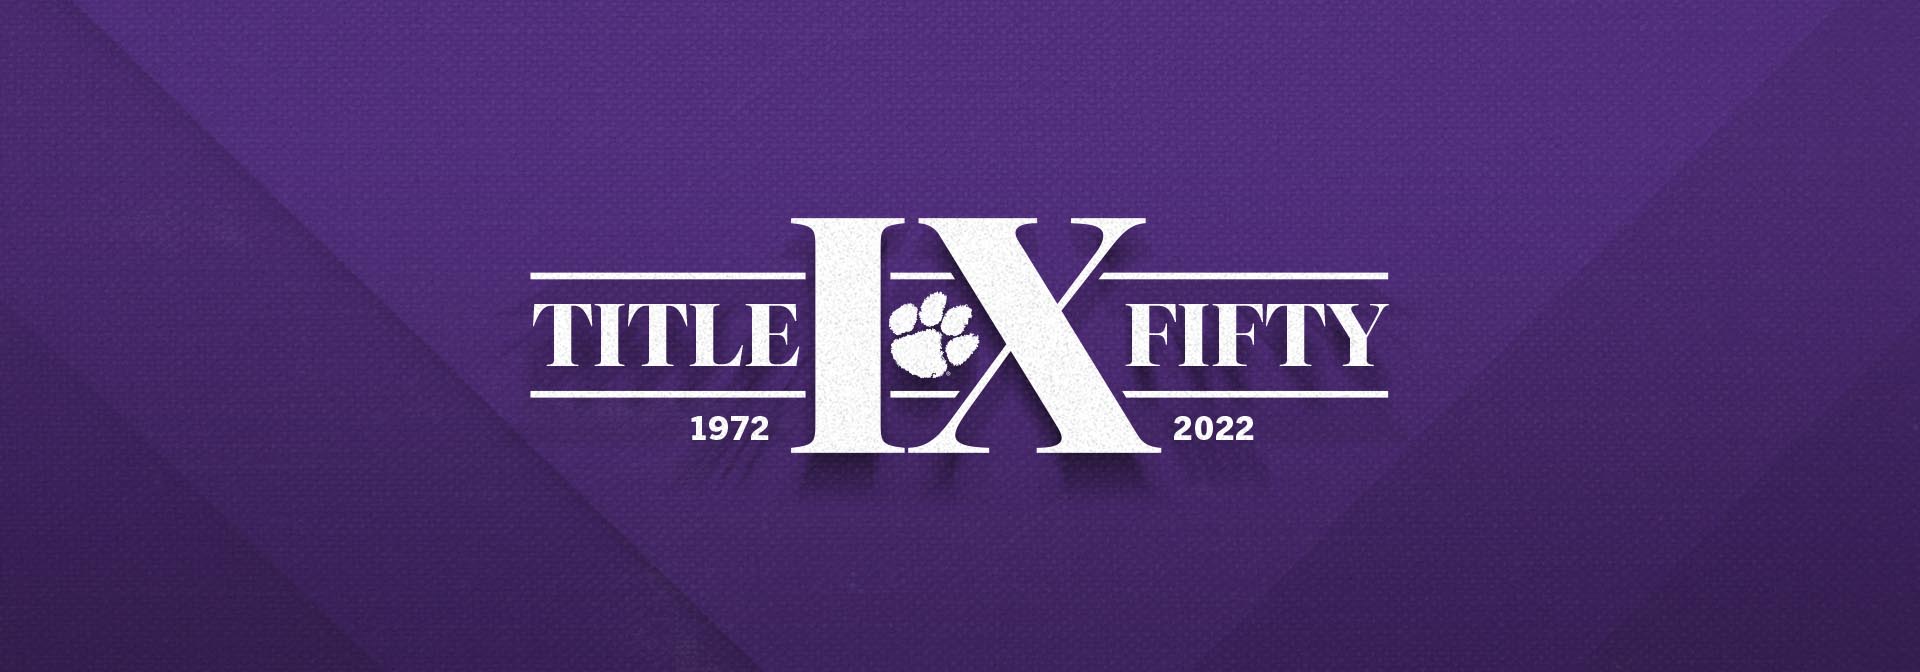 Title IX Fiftieth Anniversary graphic, showing the dates 1972-2022